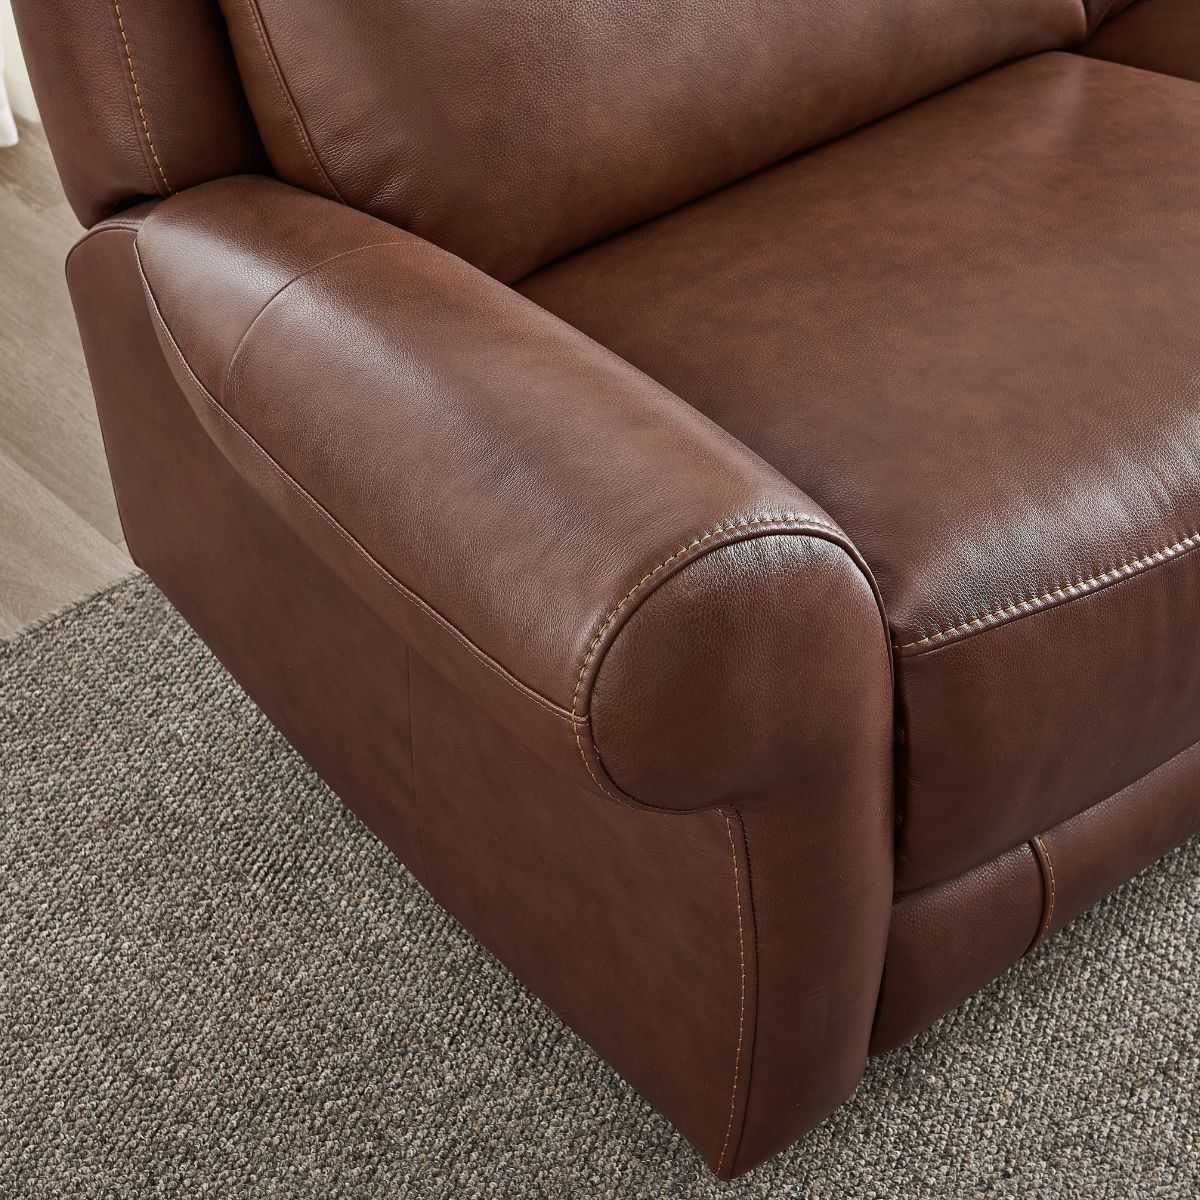 Lindfield Tan Leather 3 Seater Powered Recliner - 3